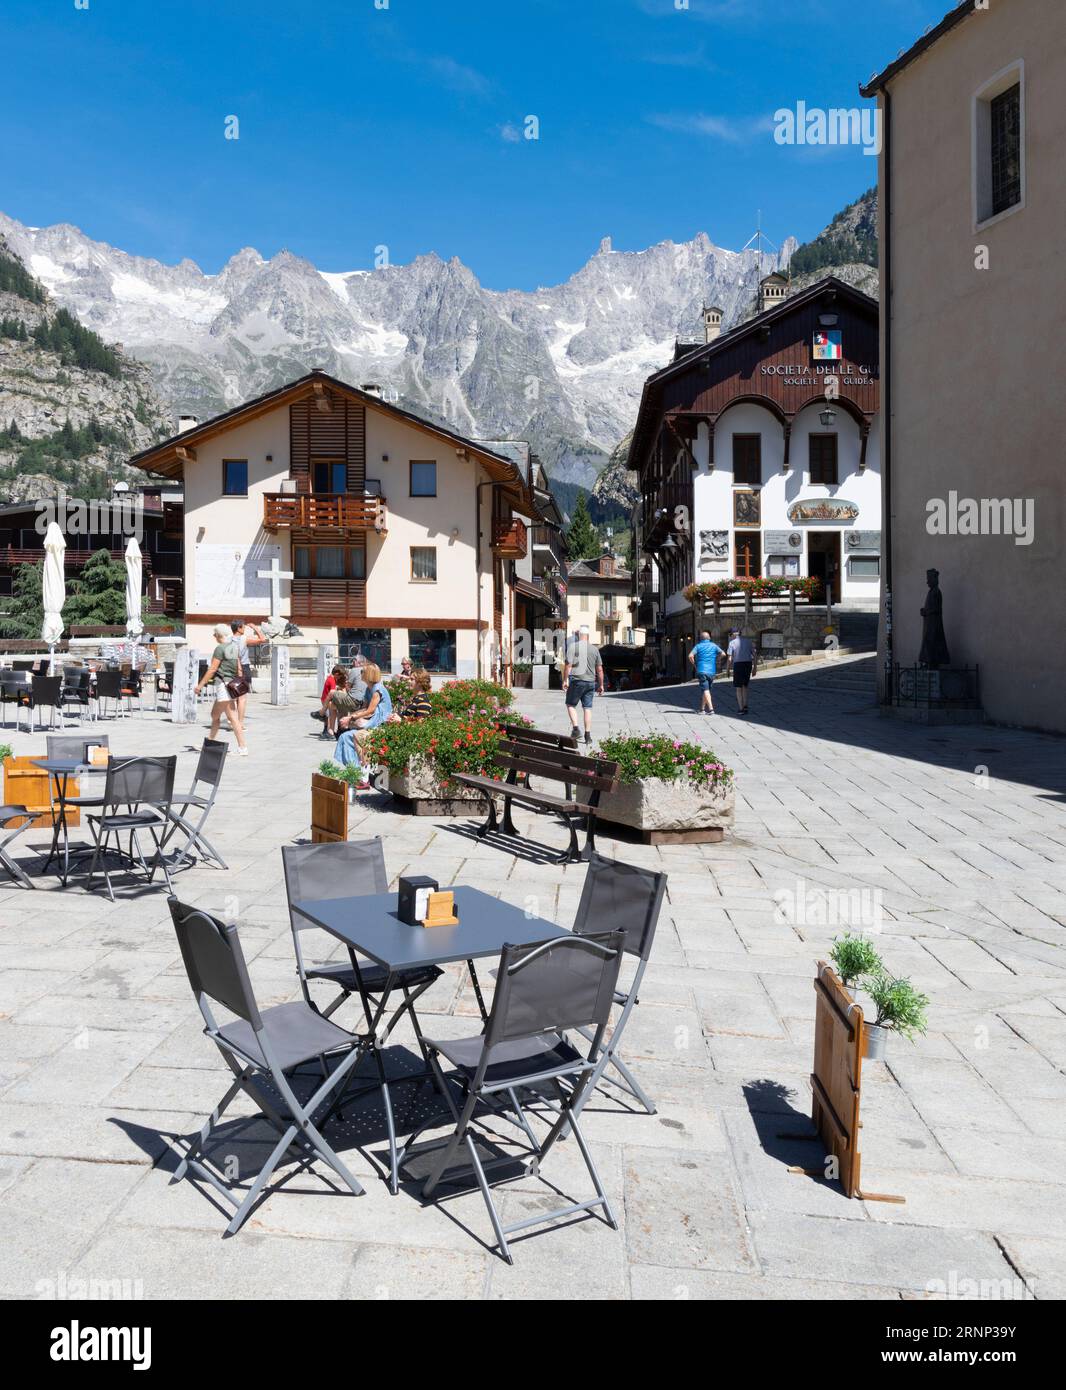 COURMAYEUR, ITALY - JULY 12, 2022: The Piazza Abbe Henry square and Grand Jorasses massif from Courmayeur - Aosta valley in Italy. Stock Photo